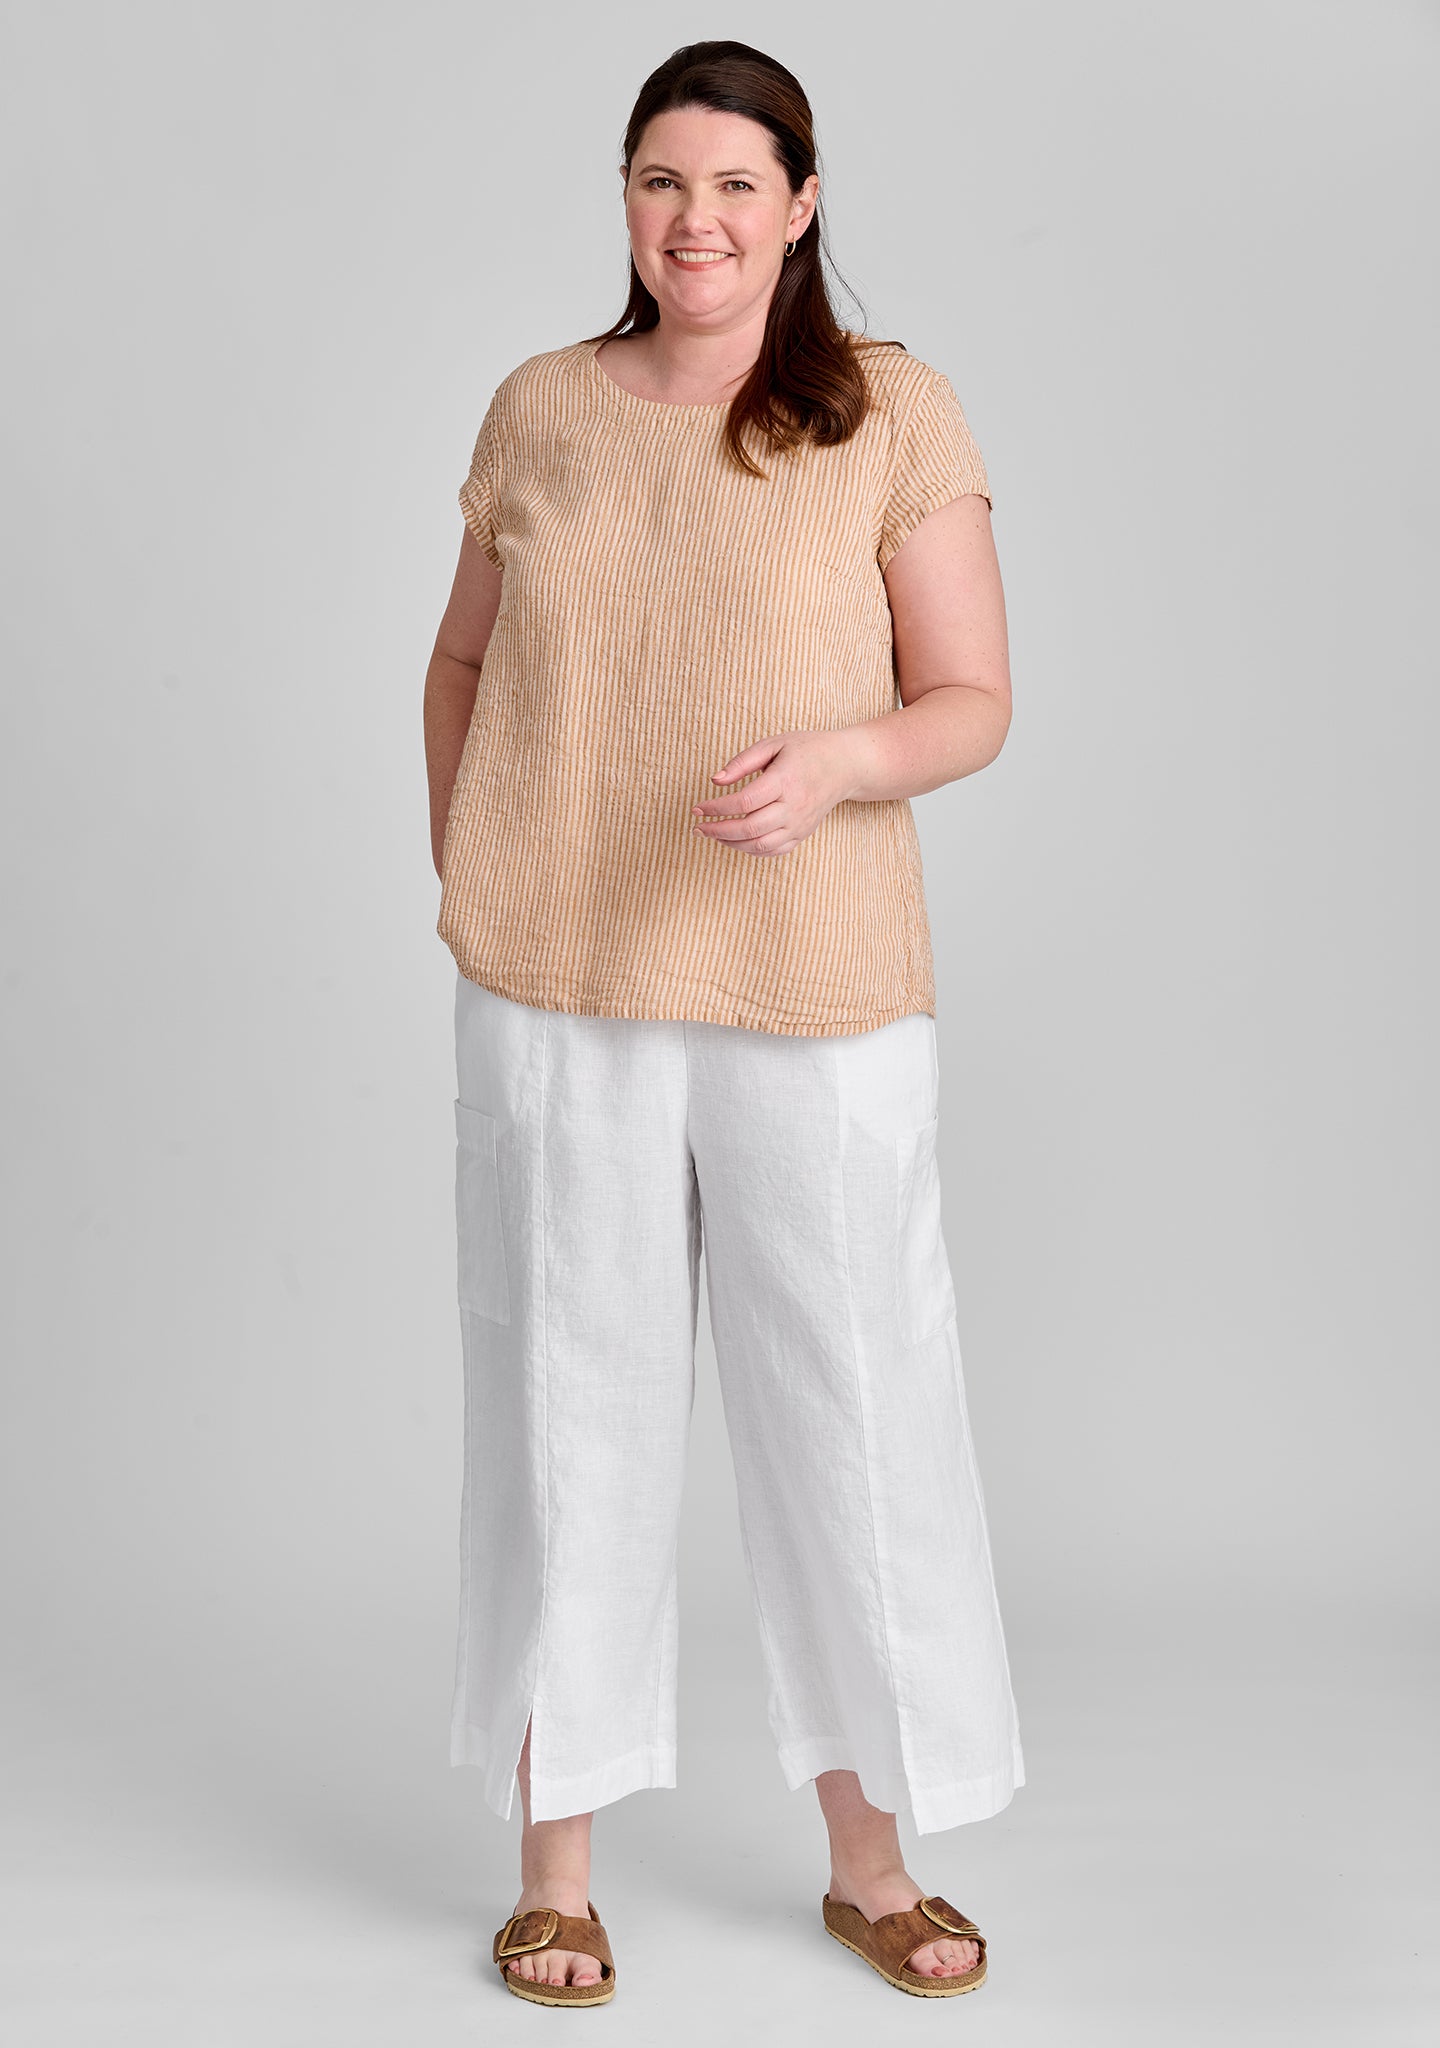 FLAX linen tee in orange with linen pants in white